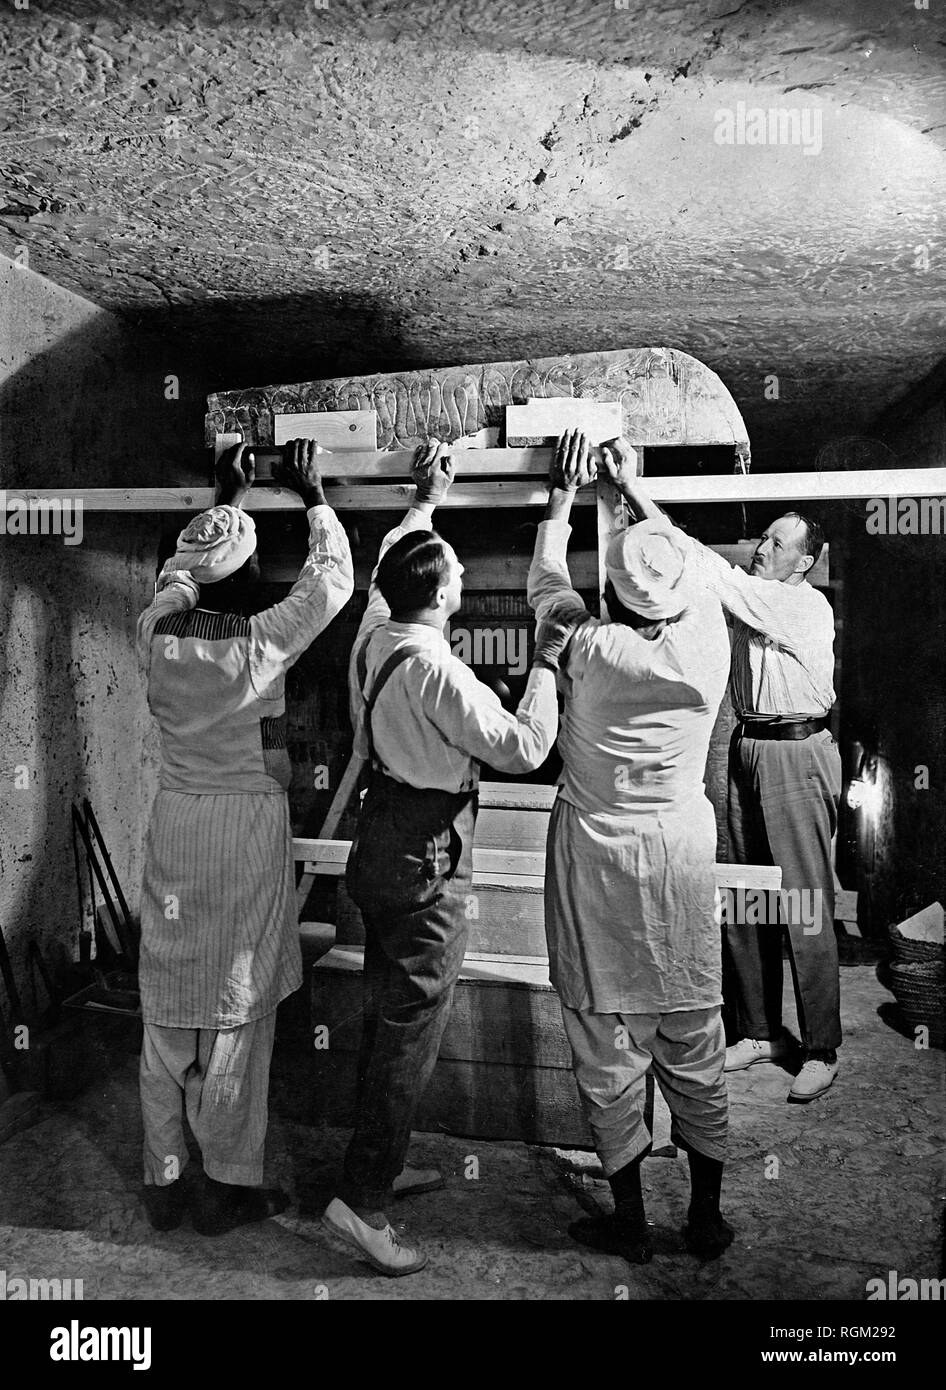 Howard Carter (second left) who discovered Tutankhamun's Tomb in the Valley of the Kings, Luxor, Egypt. November 1922 with two Egyptian workers and Arthur Callender working inside the tomb. Scanned from image material in the archives of Press Portrait Service - (formerly Press Portrait Bureau). Stock Photo